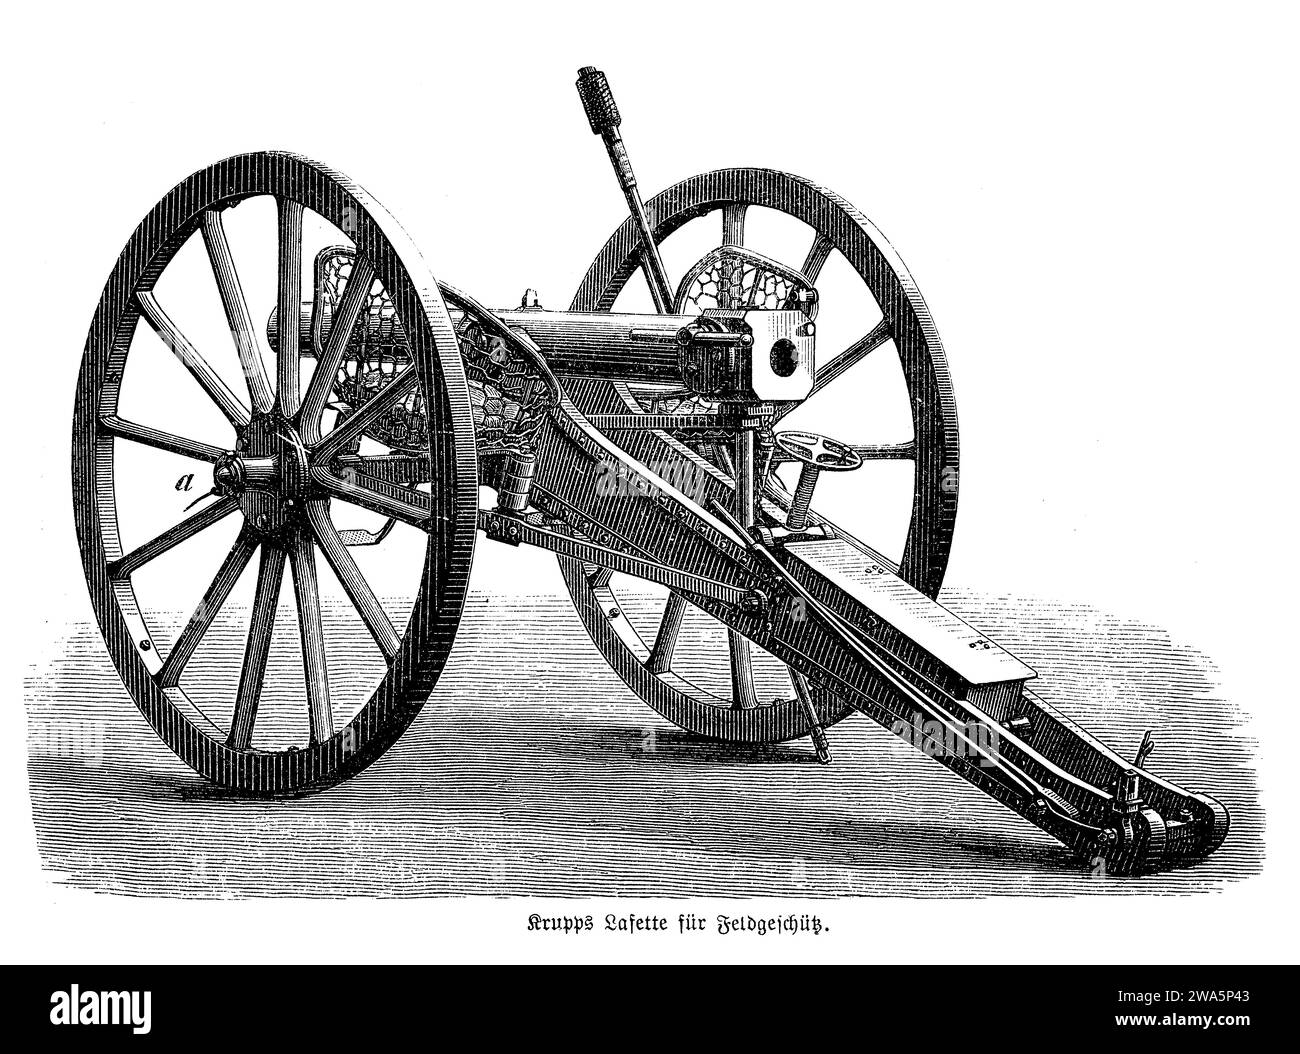 Krupp mounted gun for battle field defense with barrel on metal sleeves and unnecessary material striped away, 19th century Stock Photo